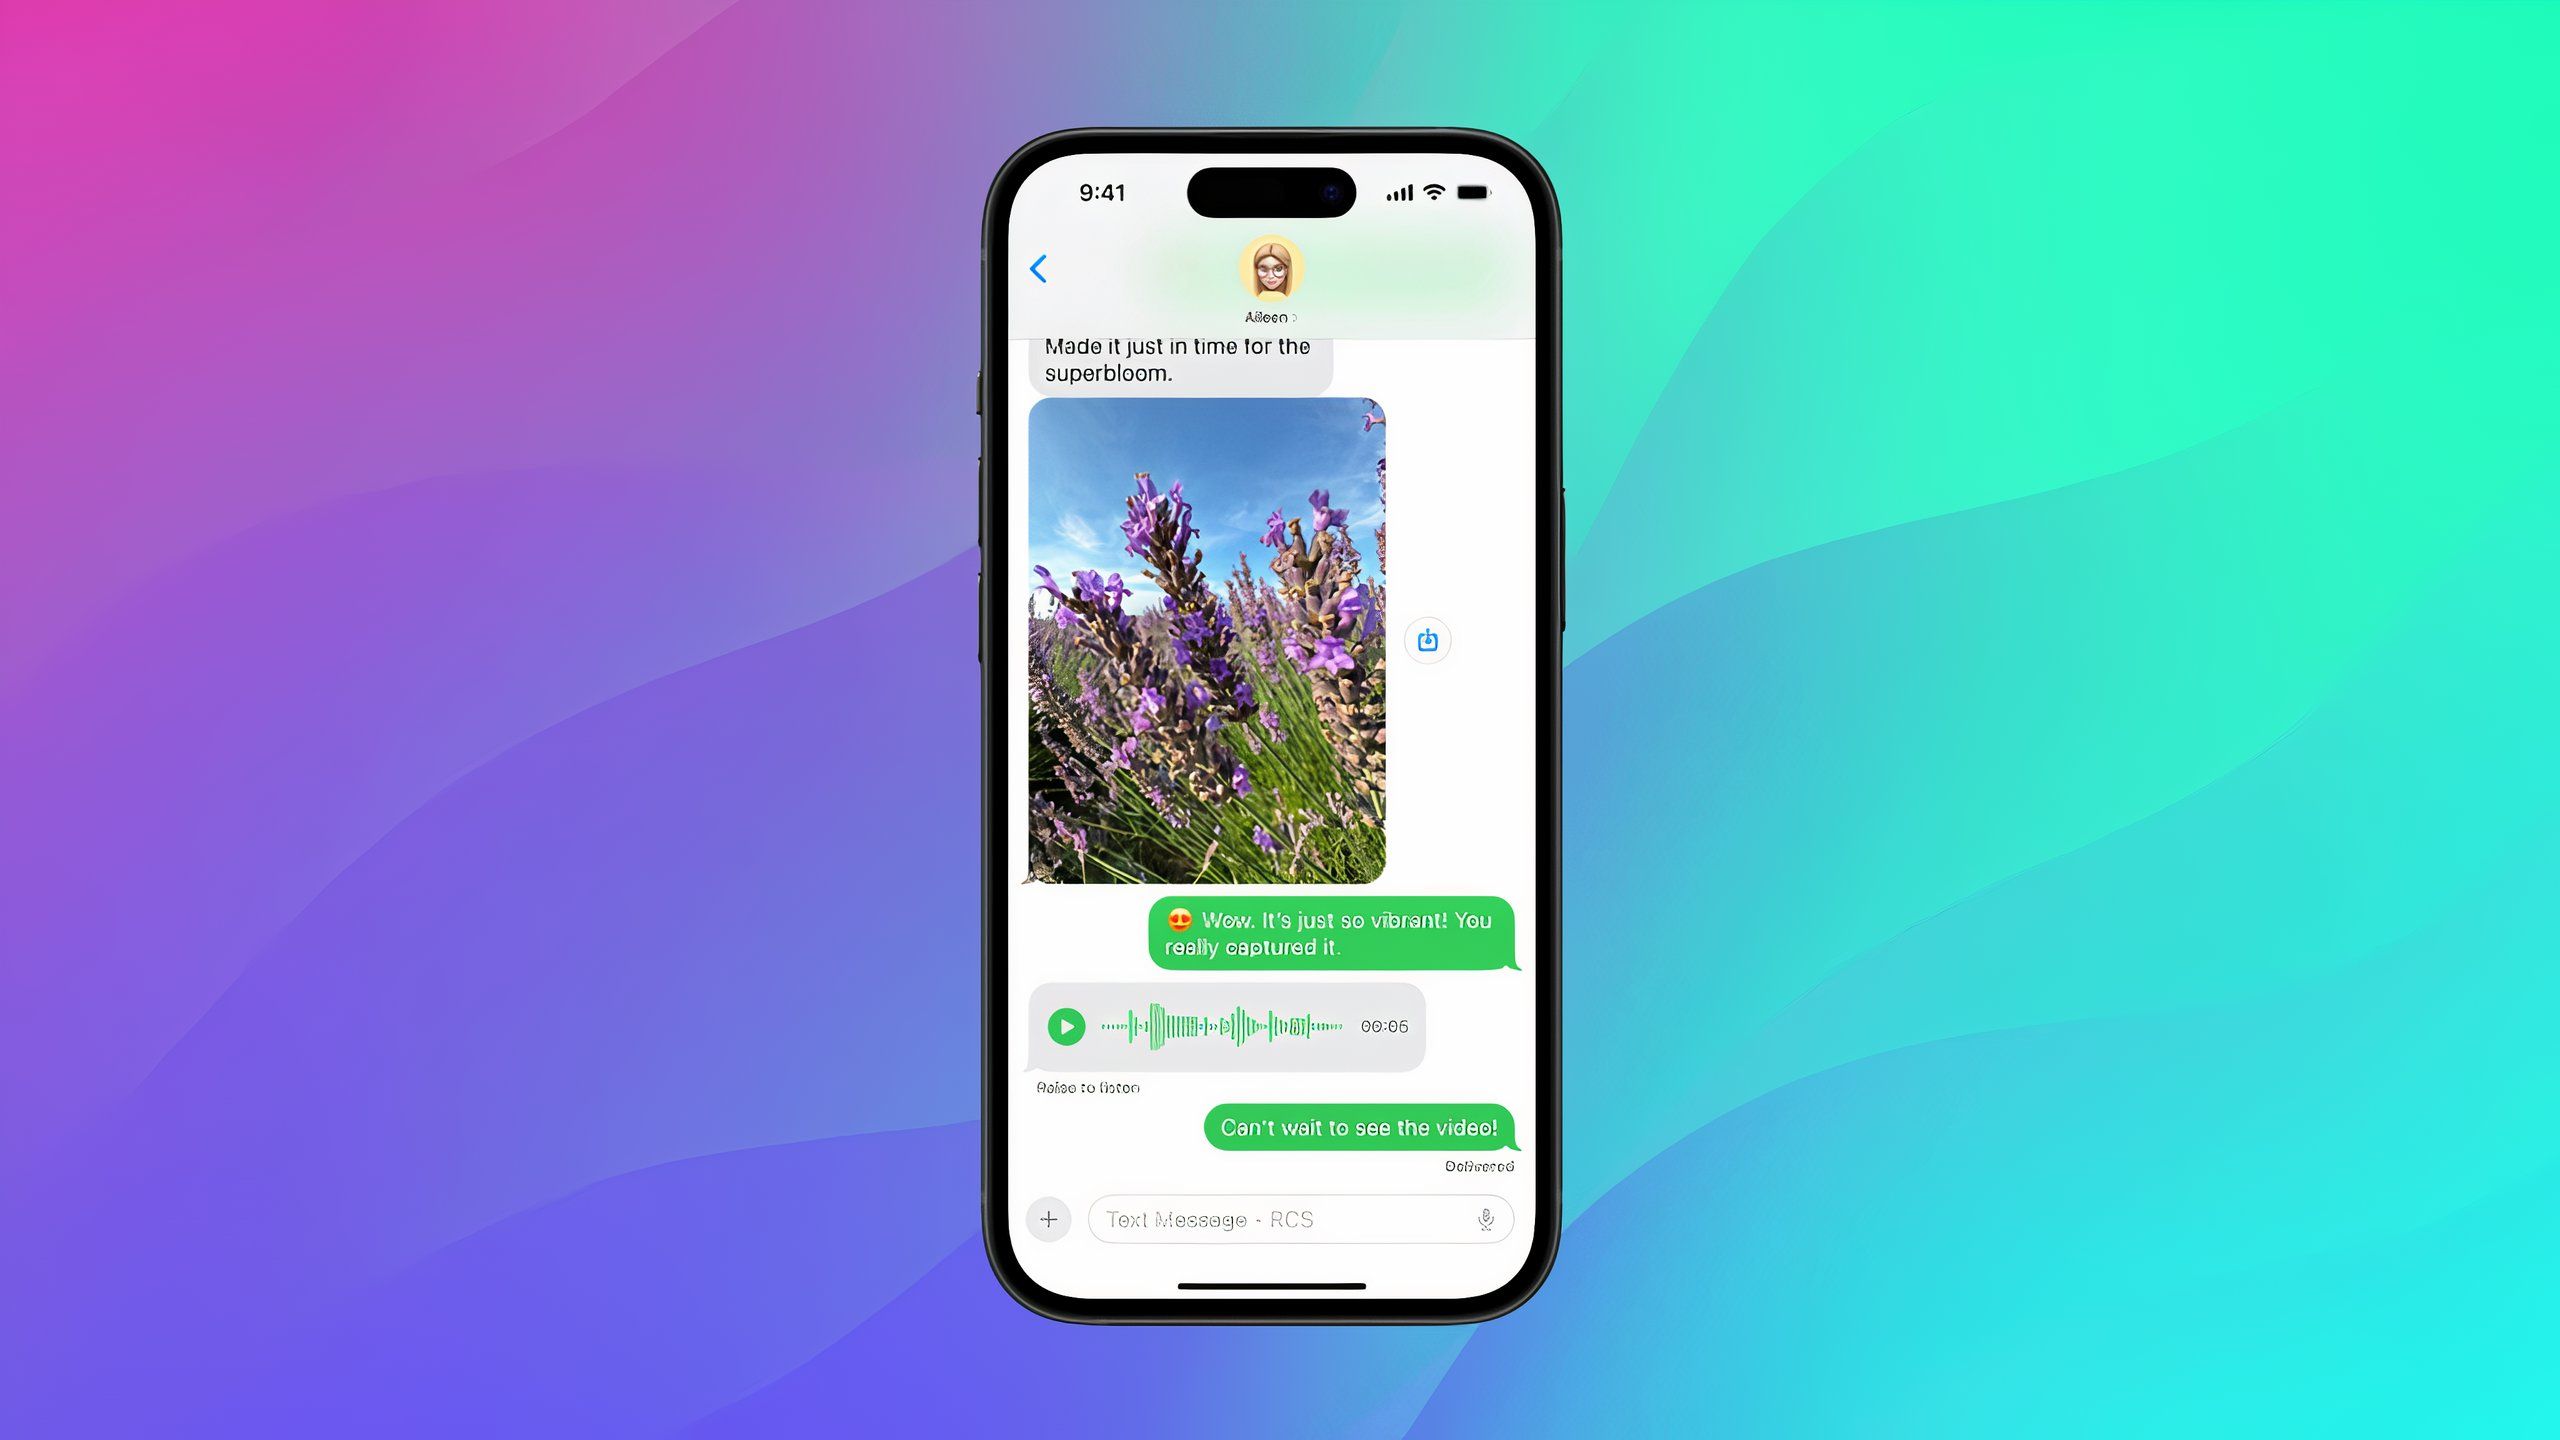 Send RCS messages against a colored background in the Messages app on iPhone